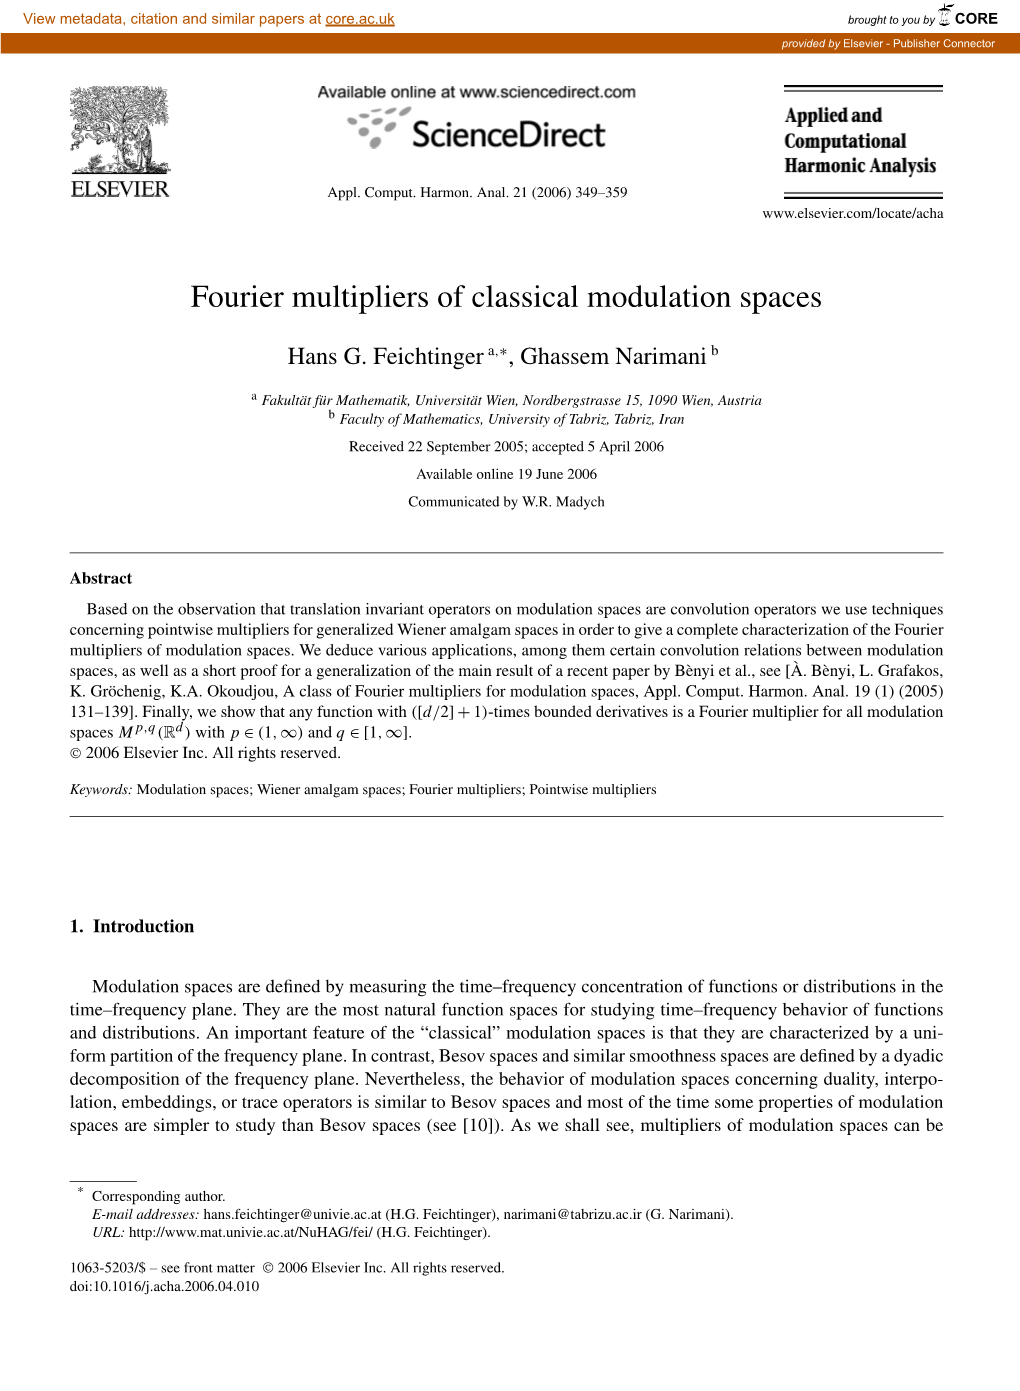 Fourier Multipliers of Classical Modulation Spaces